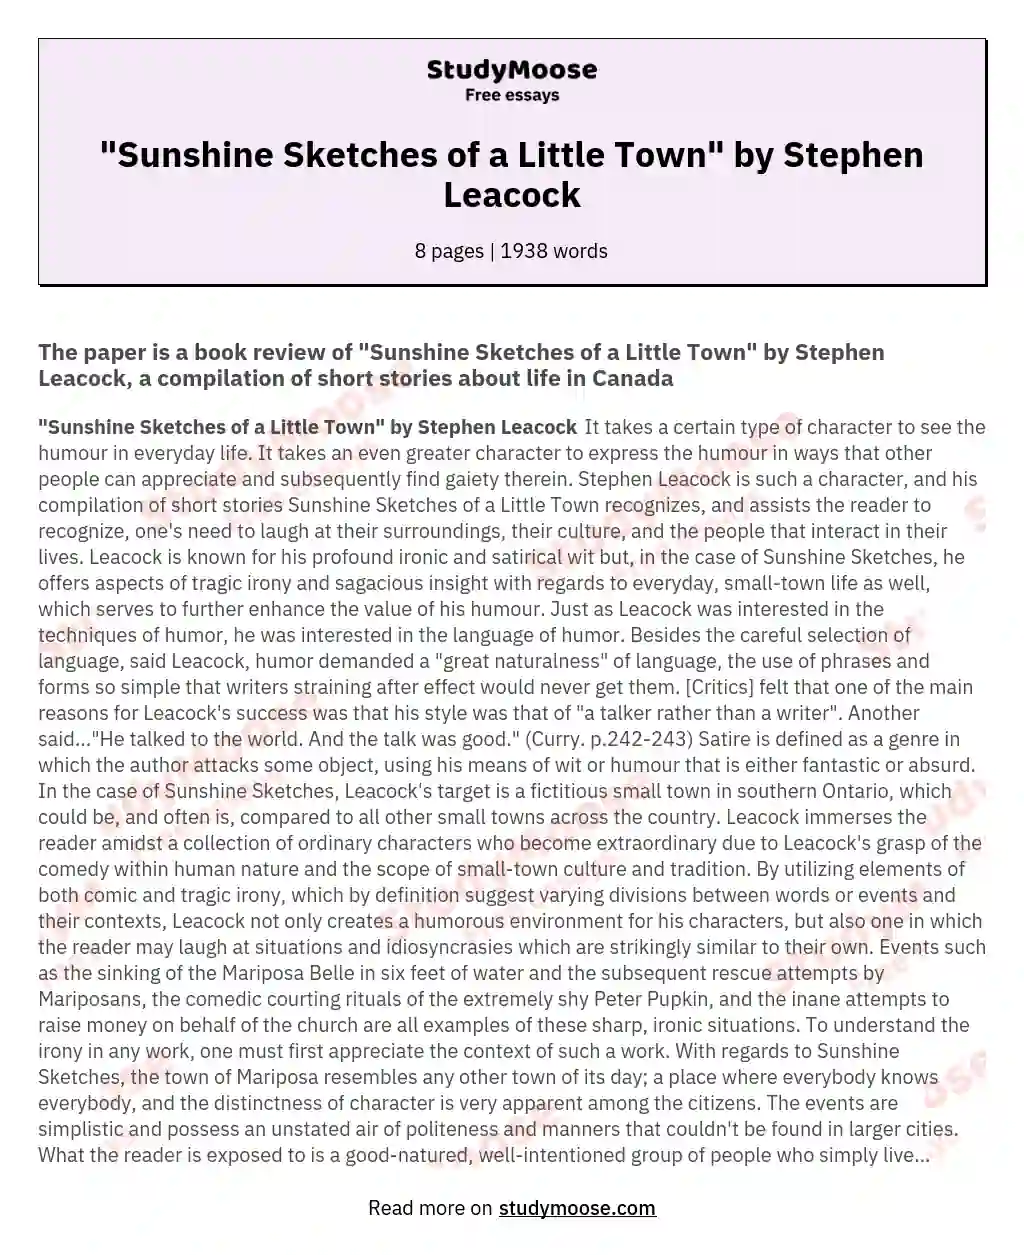 "Sunshine Sketches of a Little Town" by Stephen Leacock